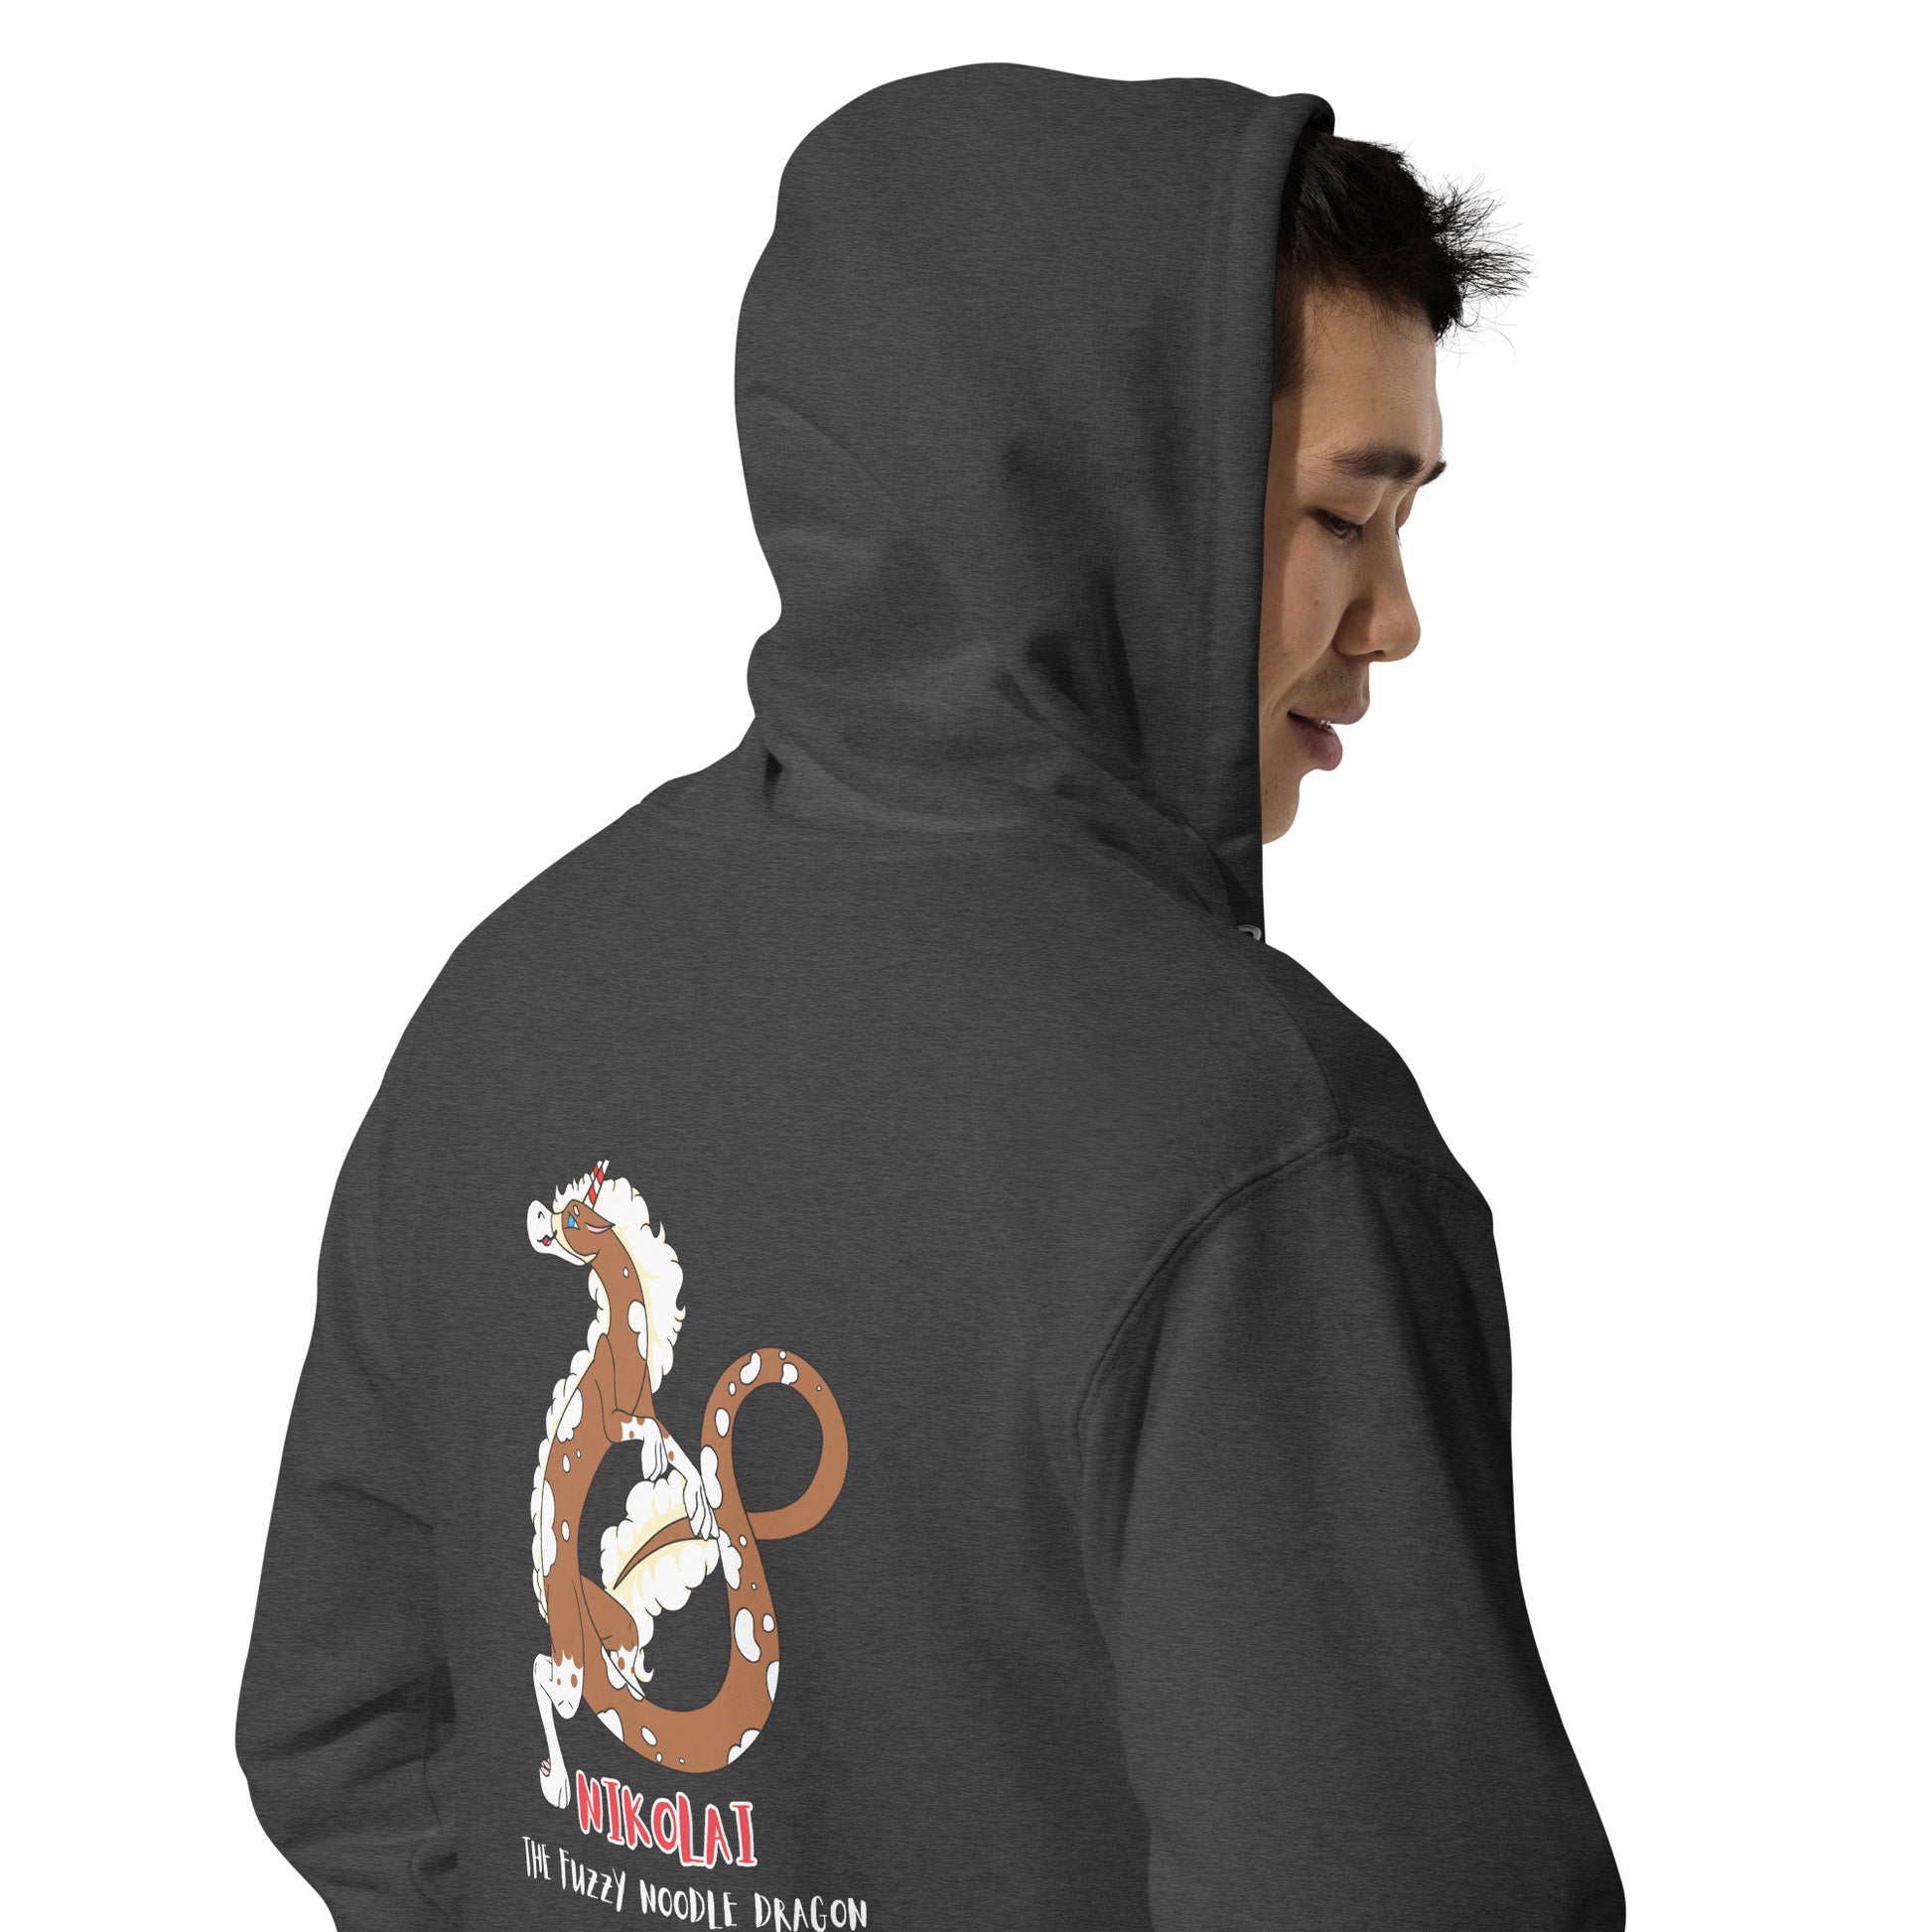 Charcoal heather colored unisex fleece zip-up hoodie. Features a back design of Nikolai the root beer float fuzzy noodle dragon. Back view shown on male model facing right.